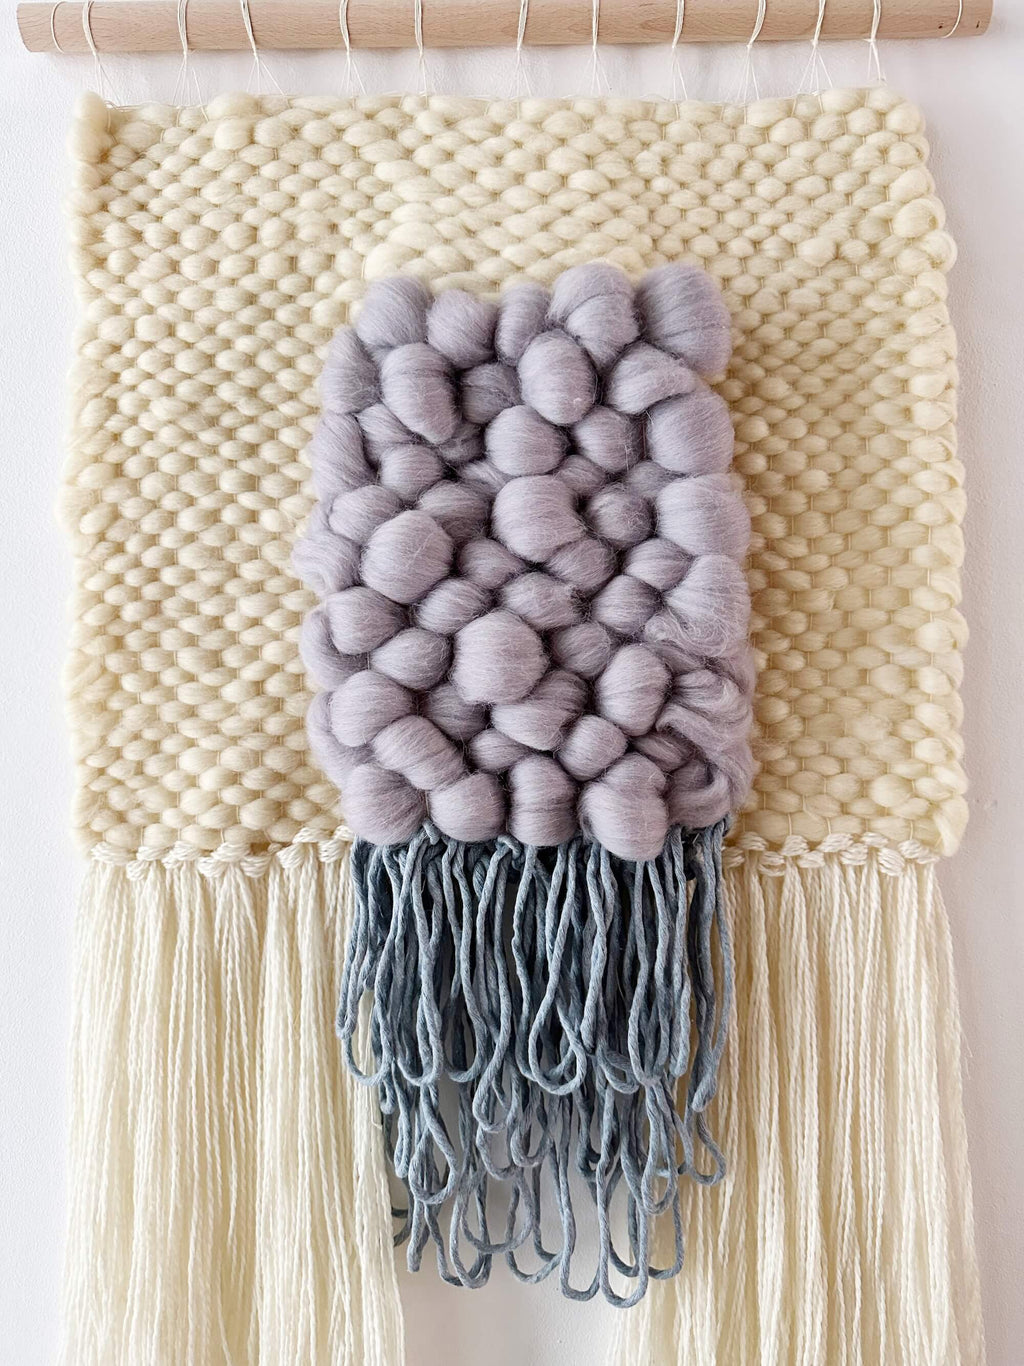 THE PORTAL Woven Wall Hanging in Silver Grey